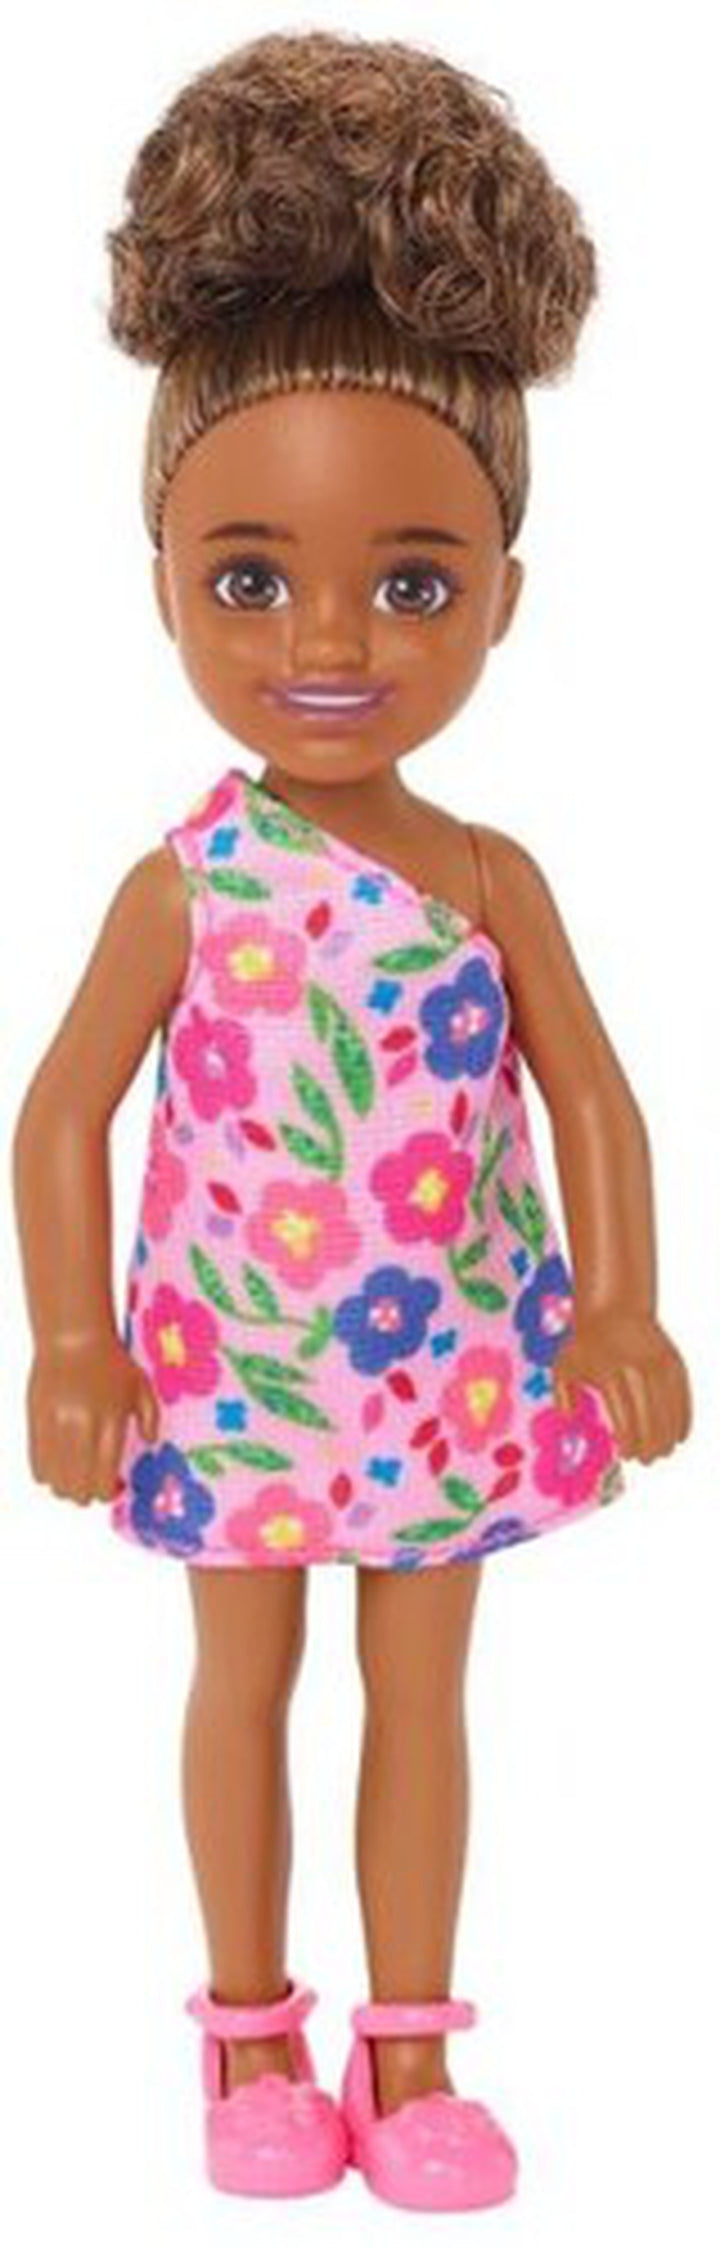 Mattel - Barbie Chelsea Doll with Pink Flowers Dress, African American